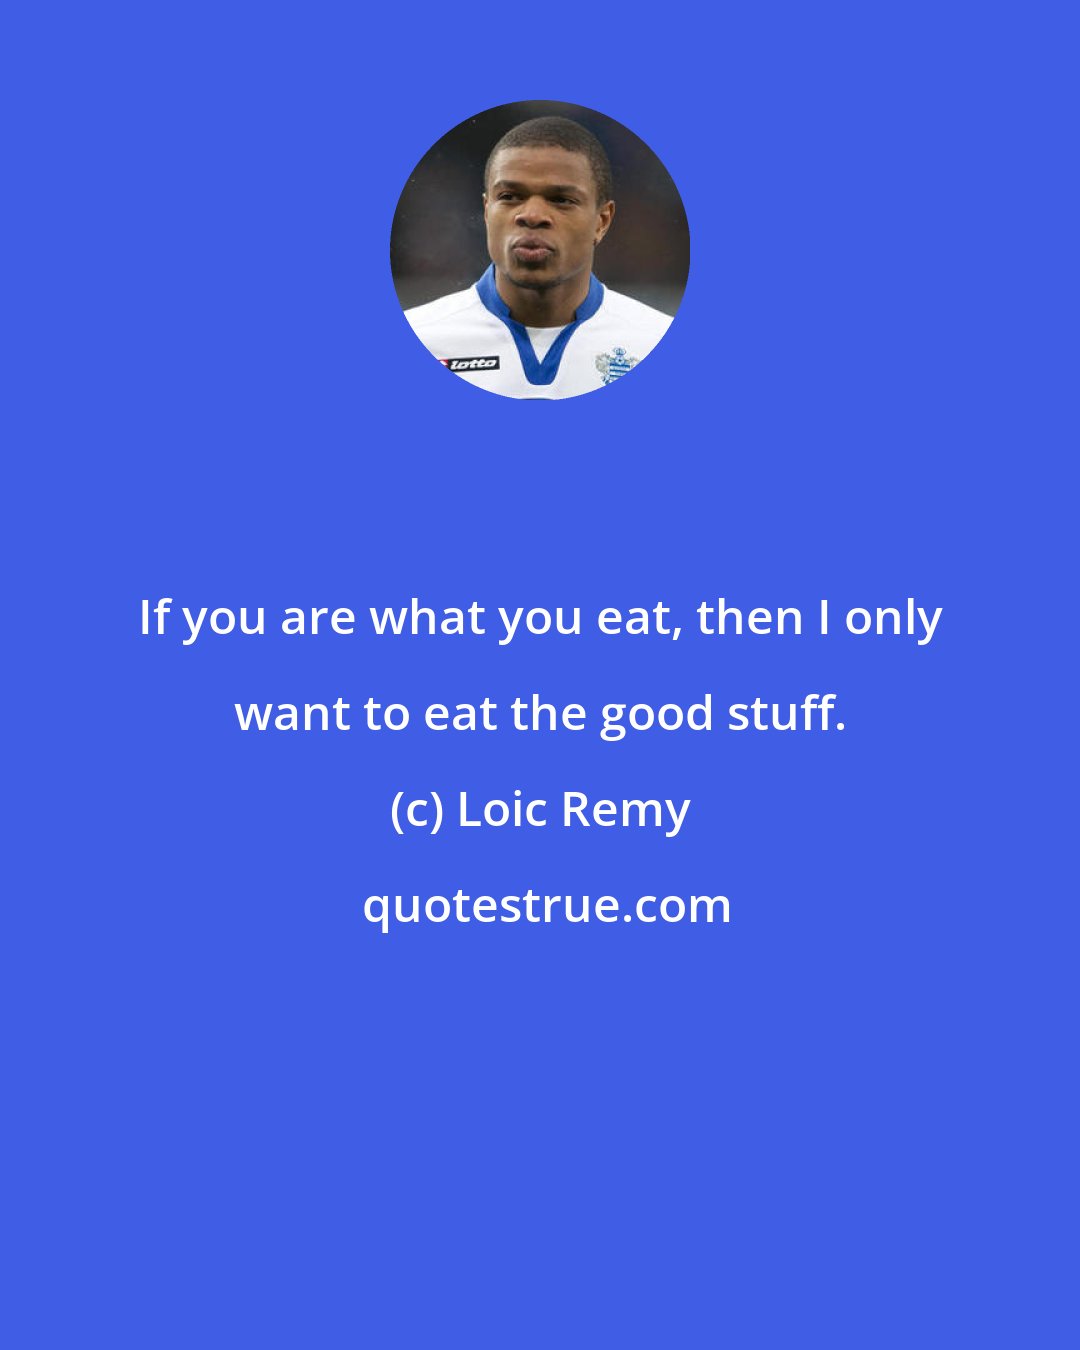 Loic Remy: If you are what you eat, then I only want to eat the good stuff.